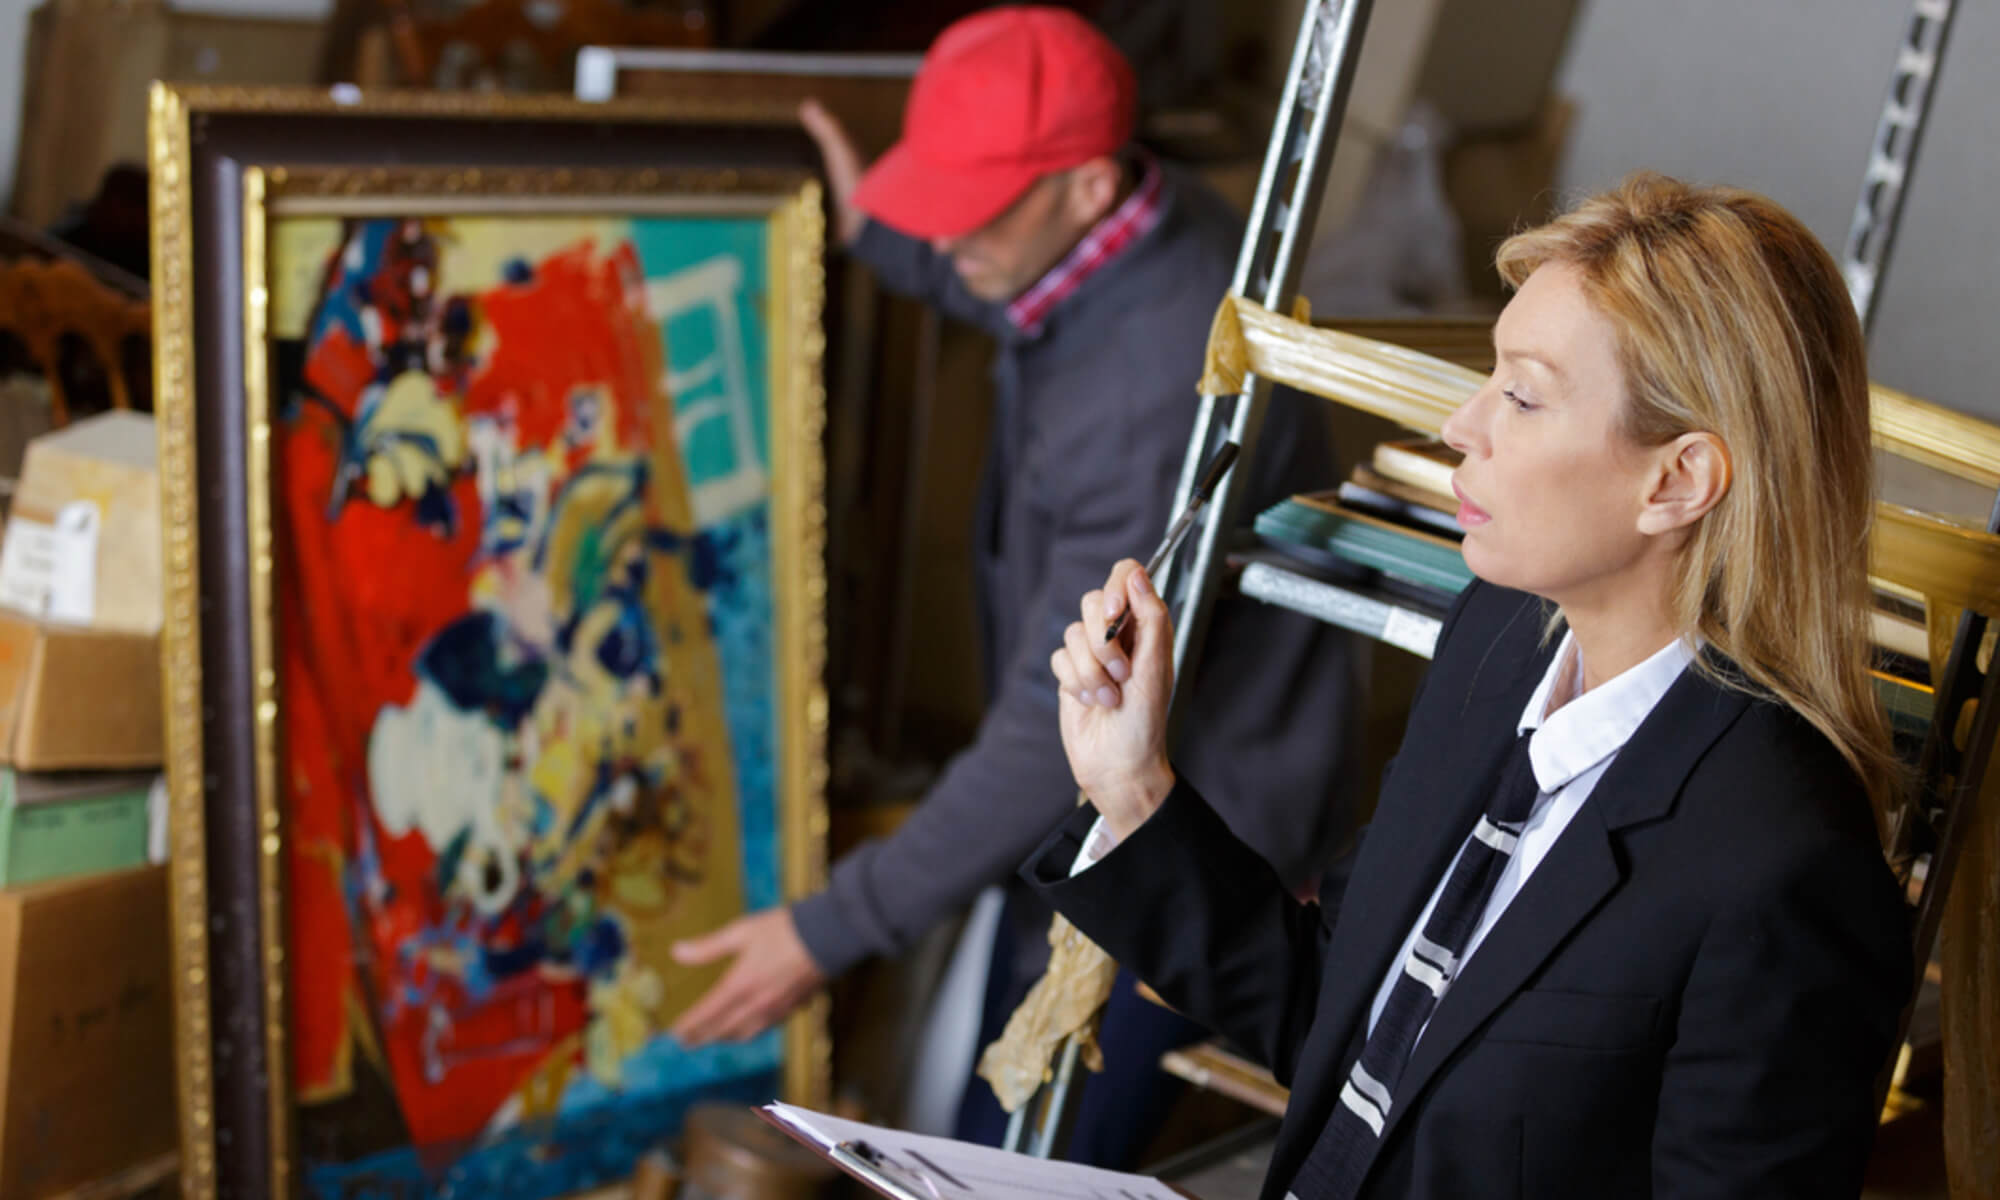 A woman with a bid sheet in the foreground and a man showing off a painting in the background.